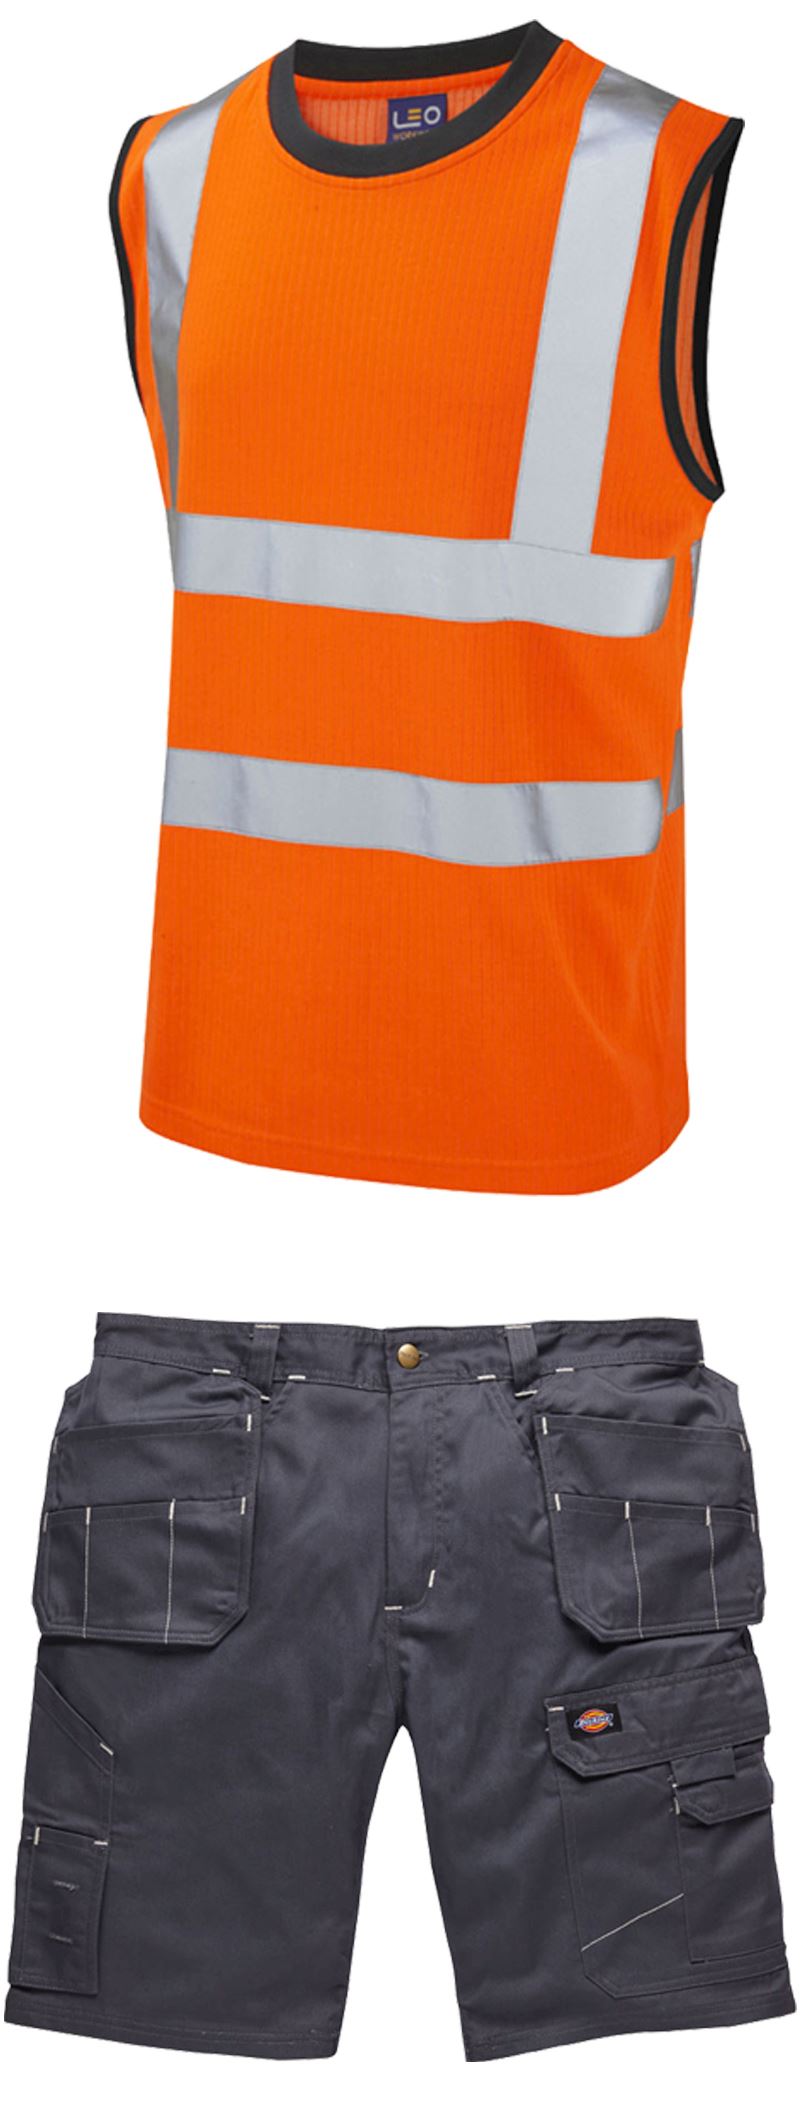 Summer Workwear - Vest and Shorts